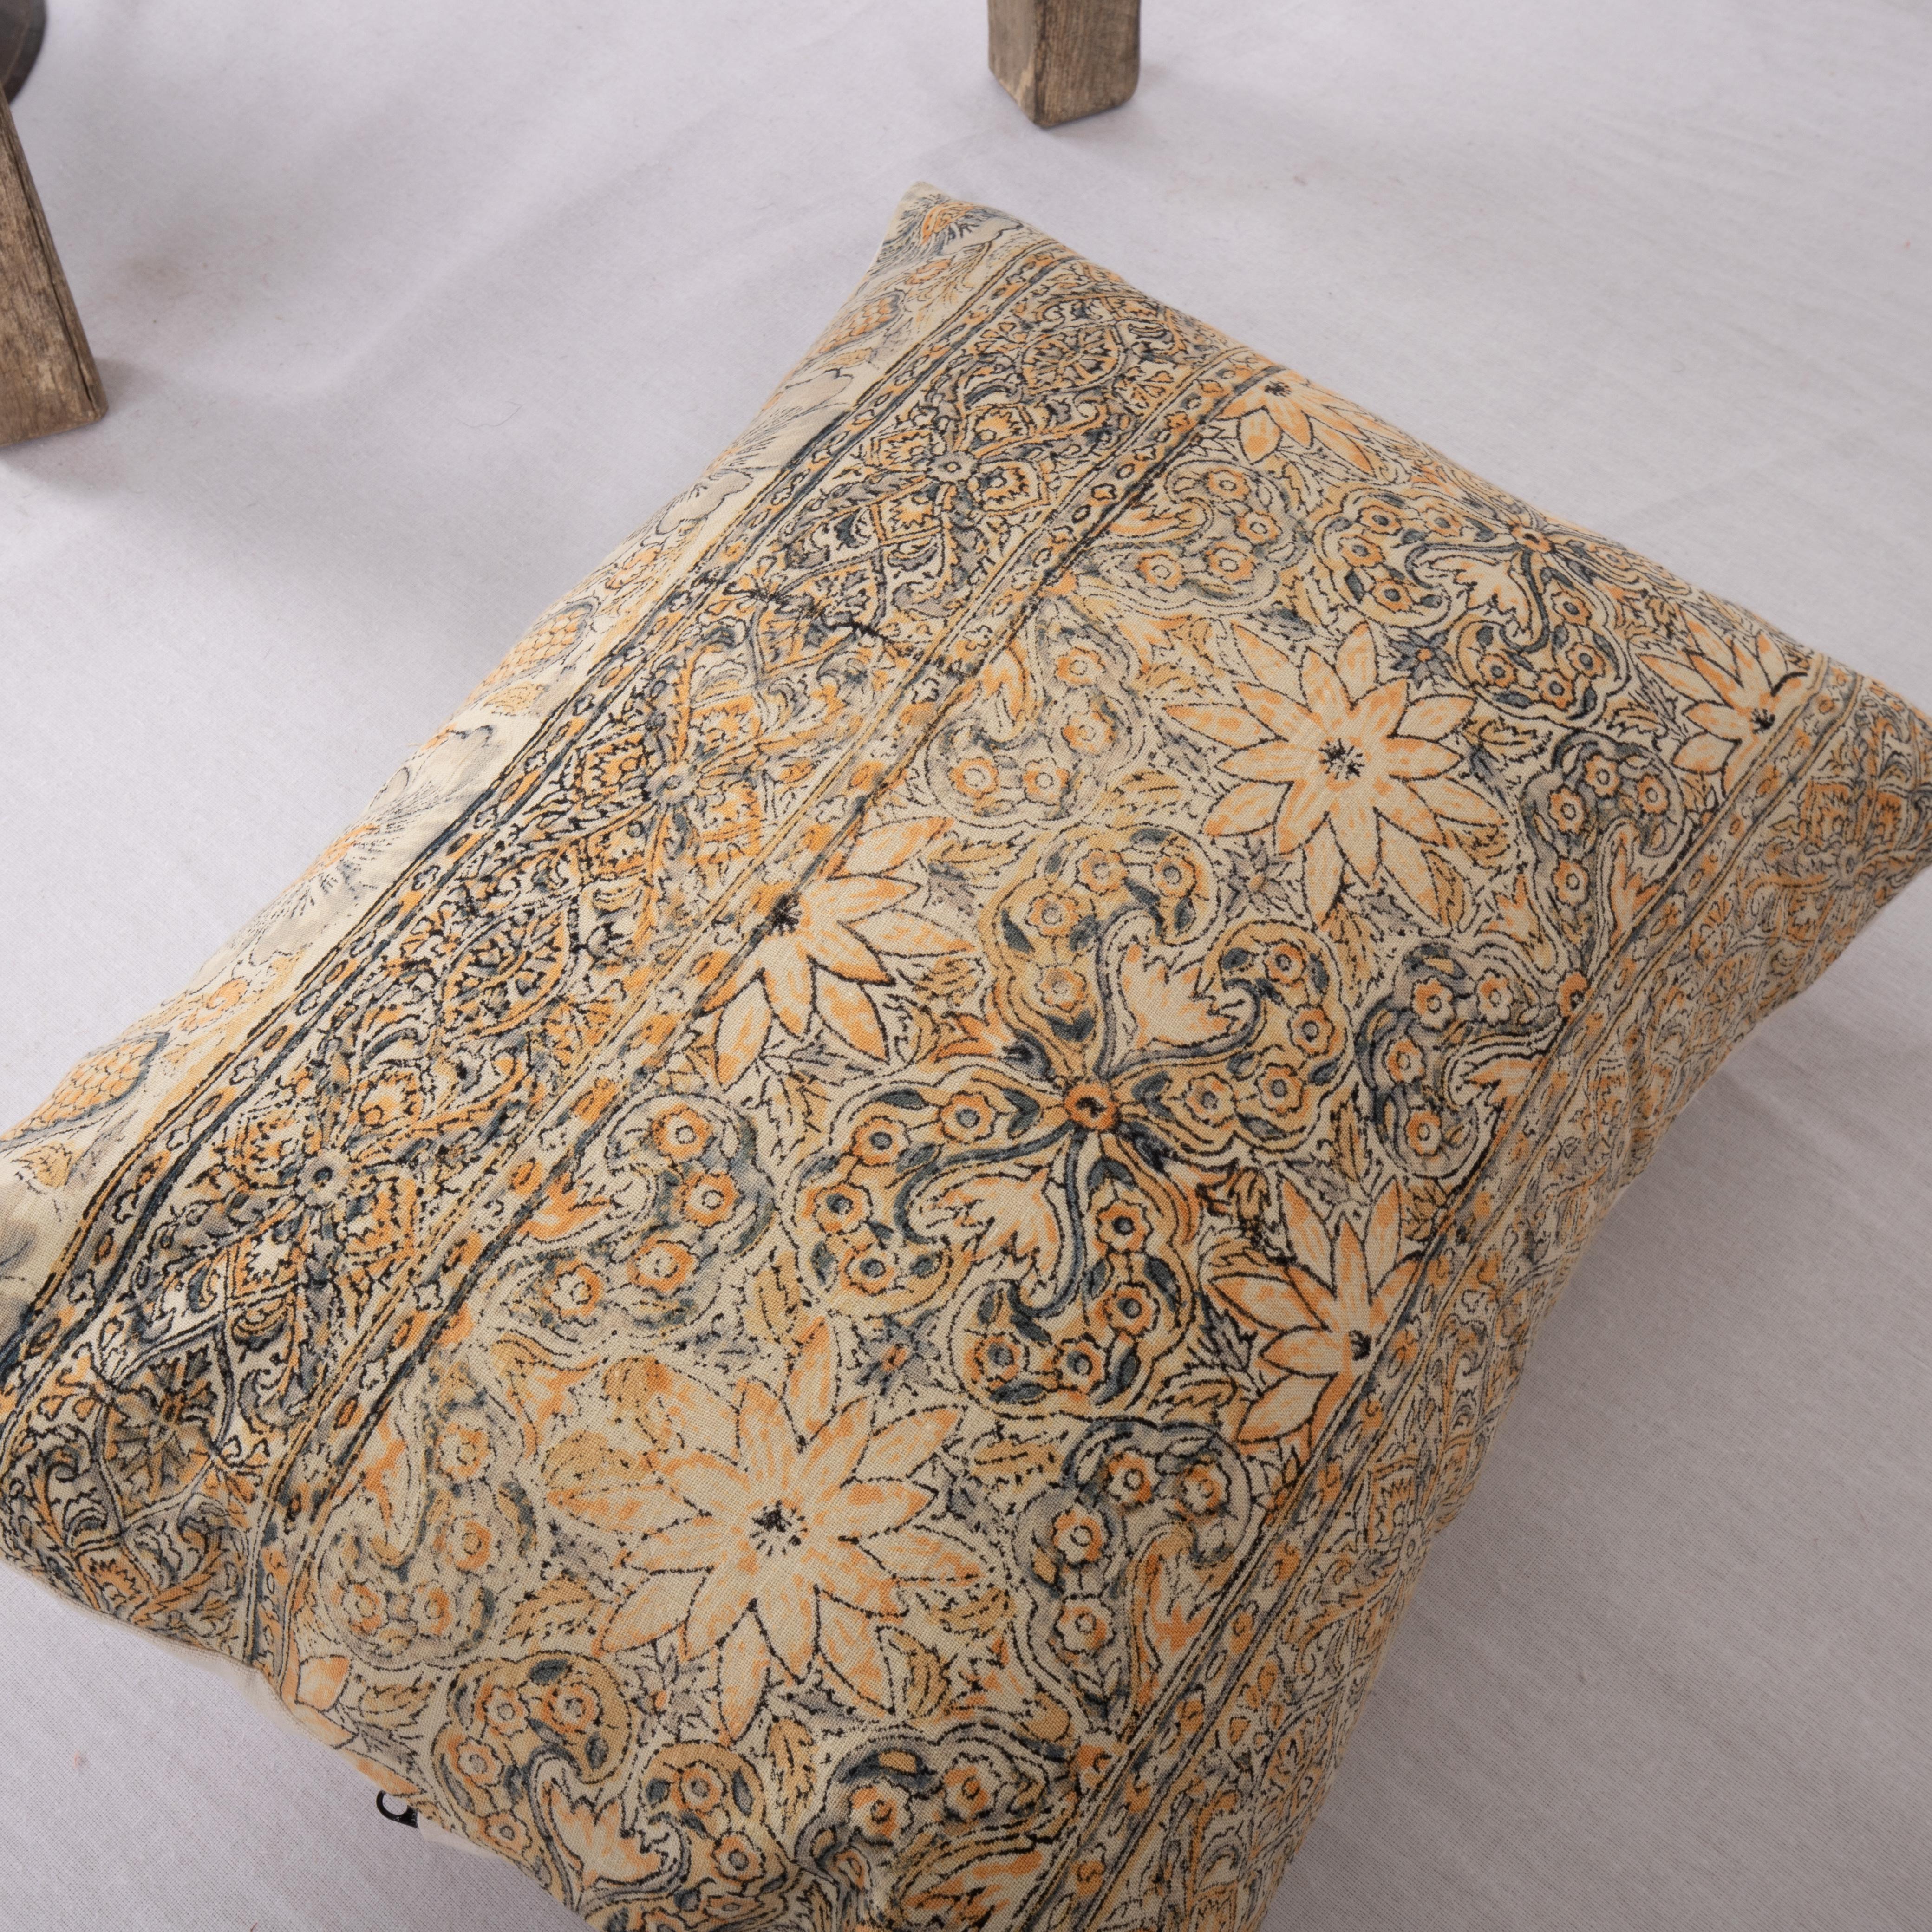 Pillow Cover made from a Vintage Indian Block Printed Textile In Good Condition For Sale In Istanbul, TR